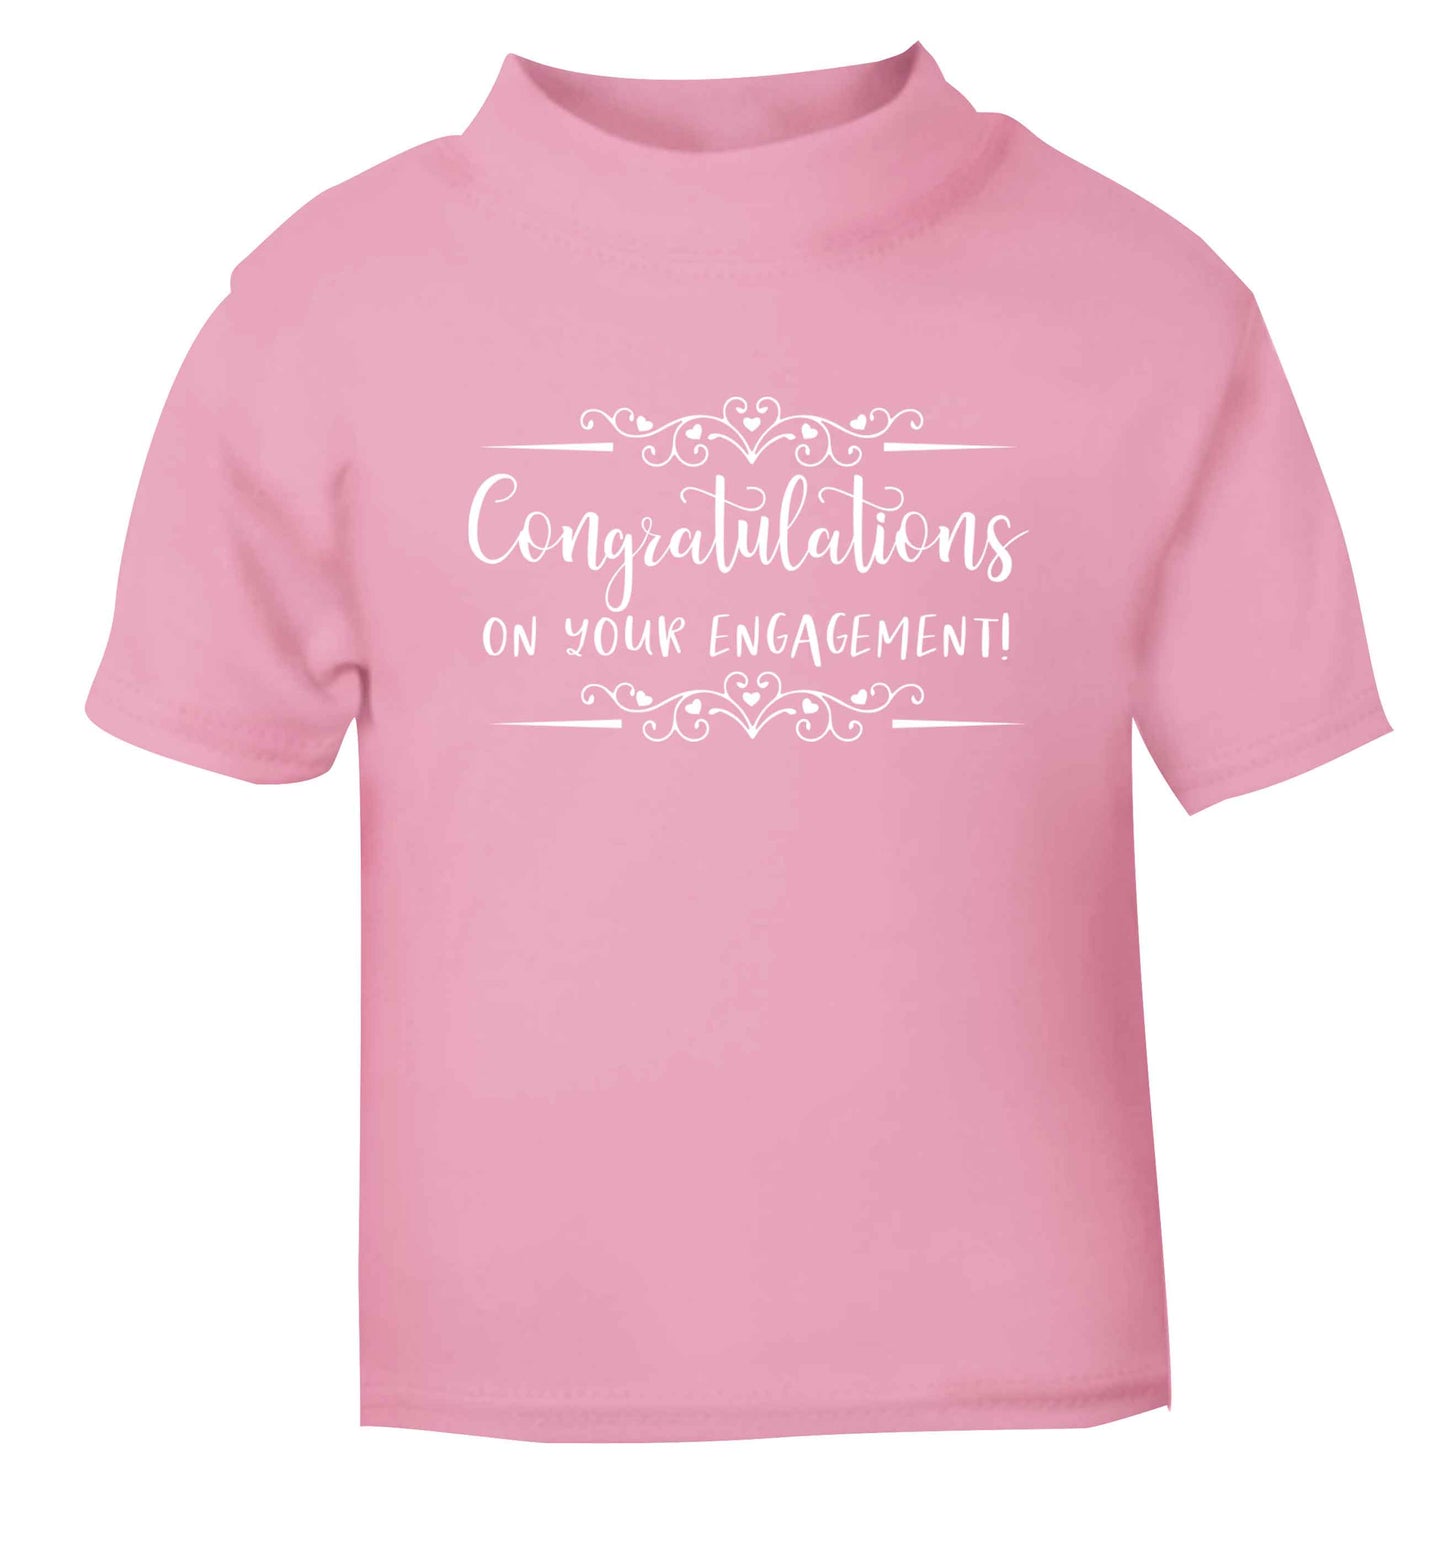 Congratulations on your engagement light pink baby toddler Tshirt 2 Years